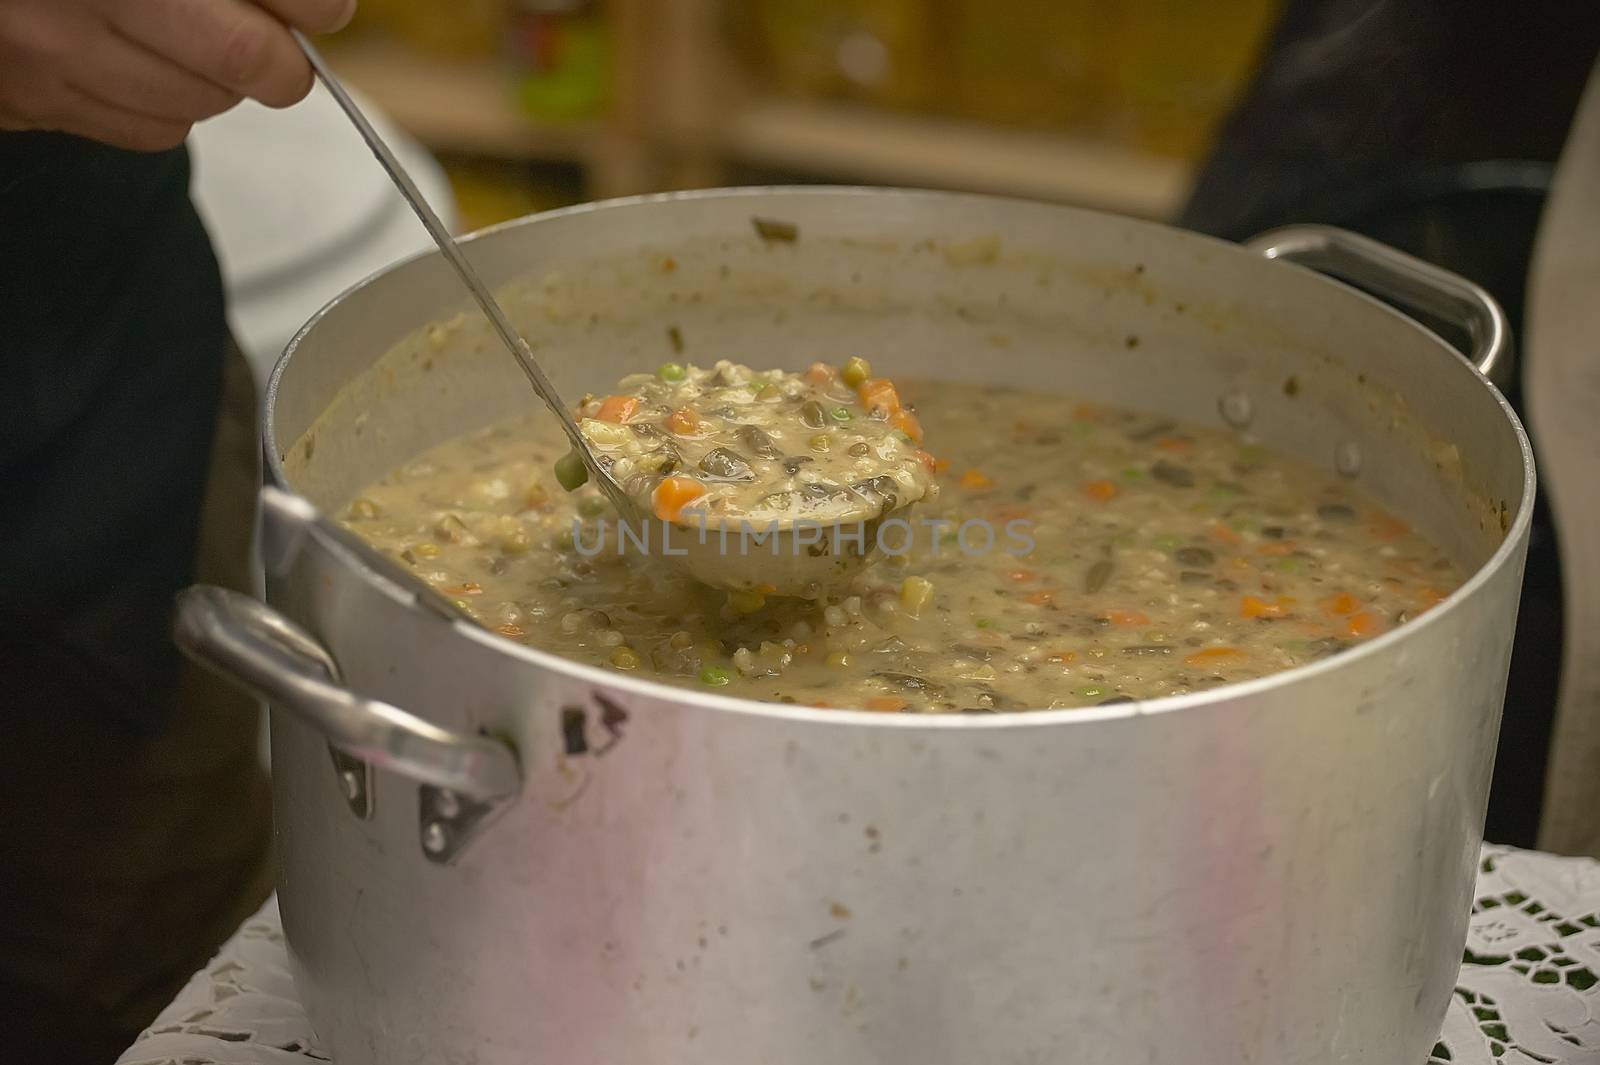 Large pot full of vegetable and cereal soup ready to be served to diners.